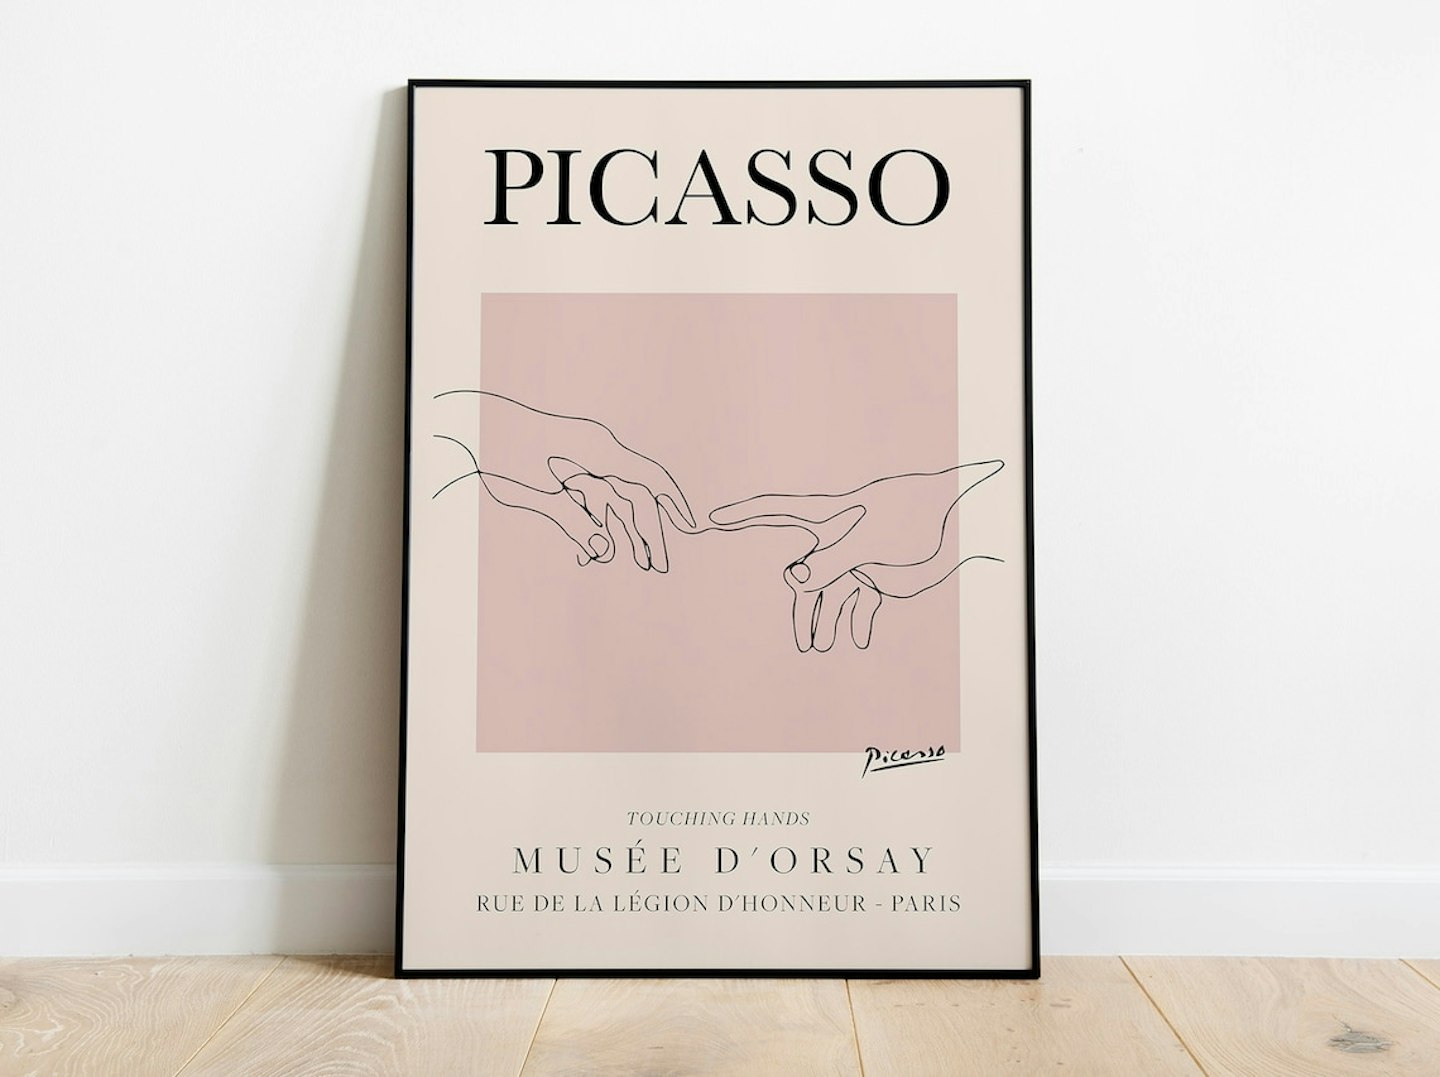 Etsy, Picasso - Touching Hands Print, From £4.95